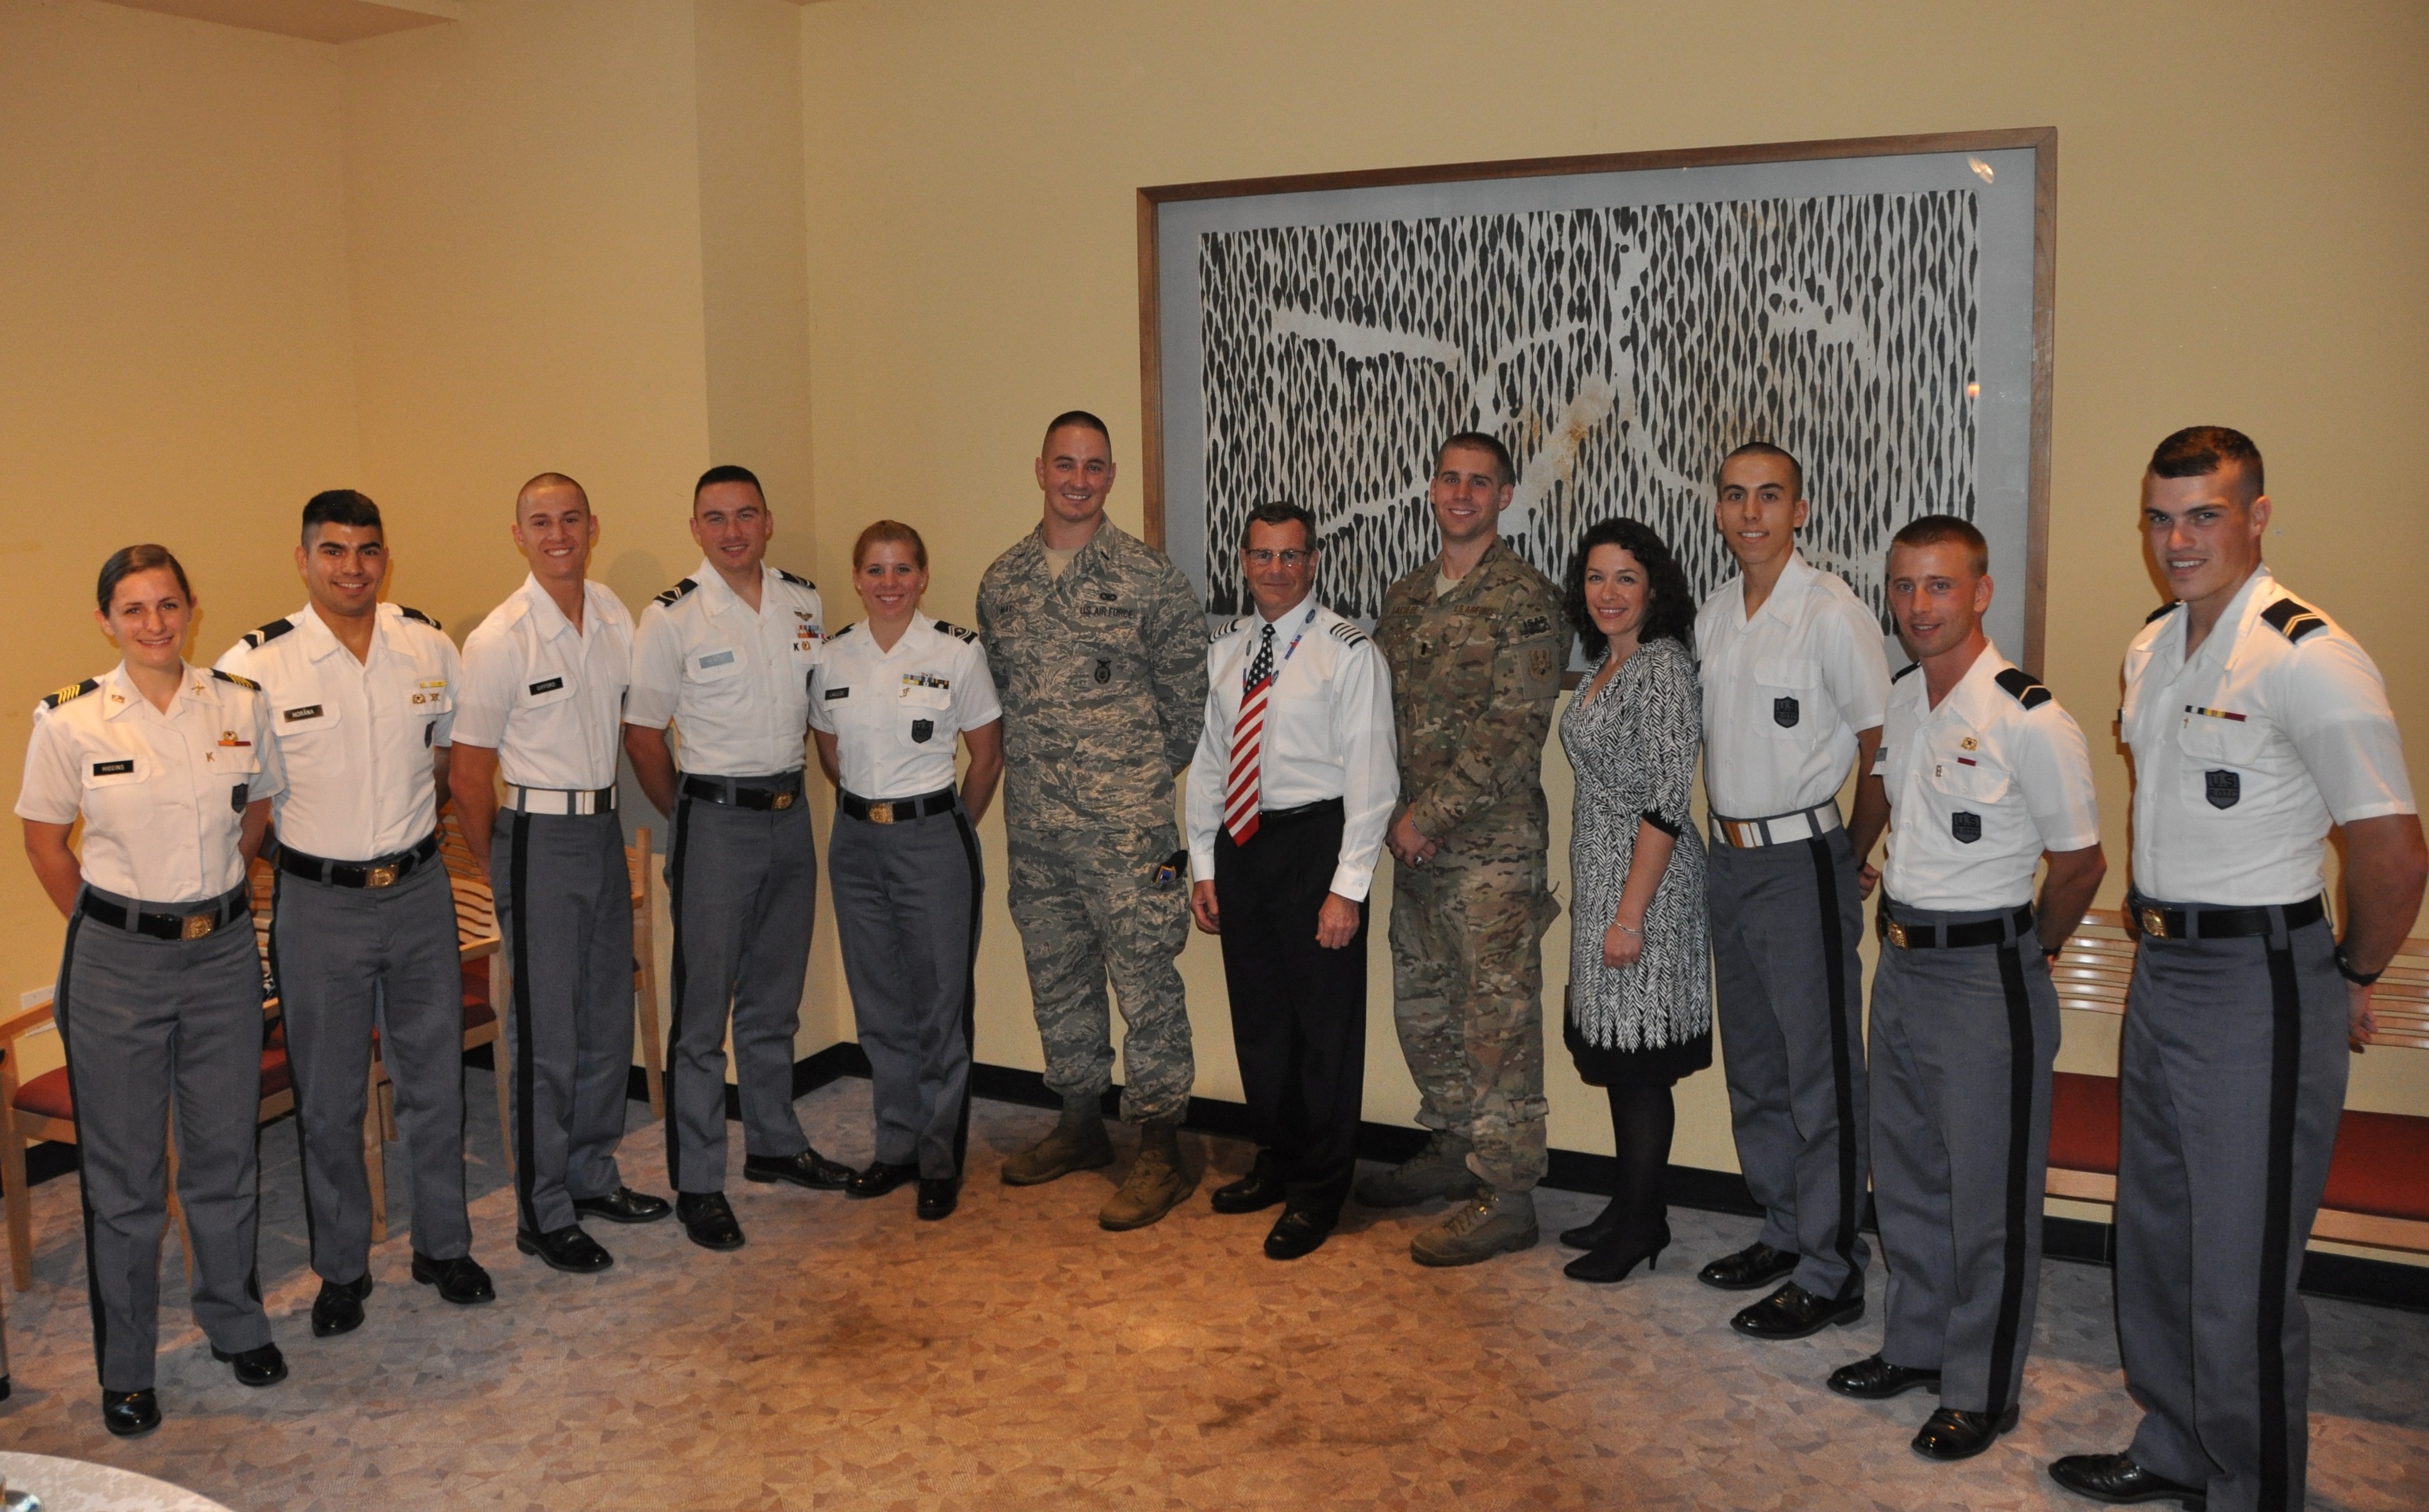 Cadets stand with the visiting Fall 2013 Gunfighters at the reception following the panel.